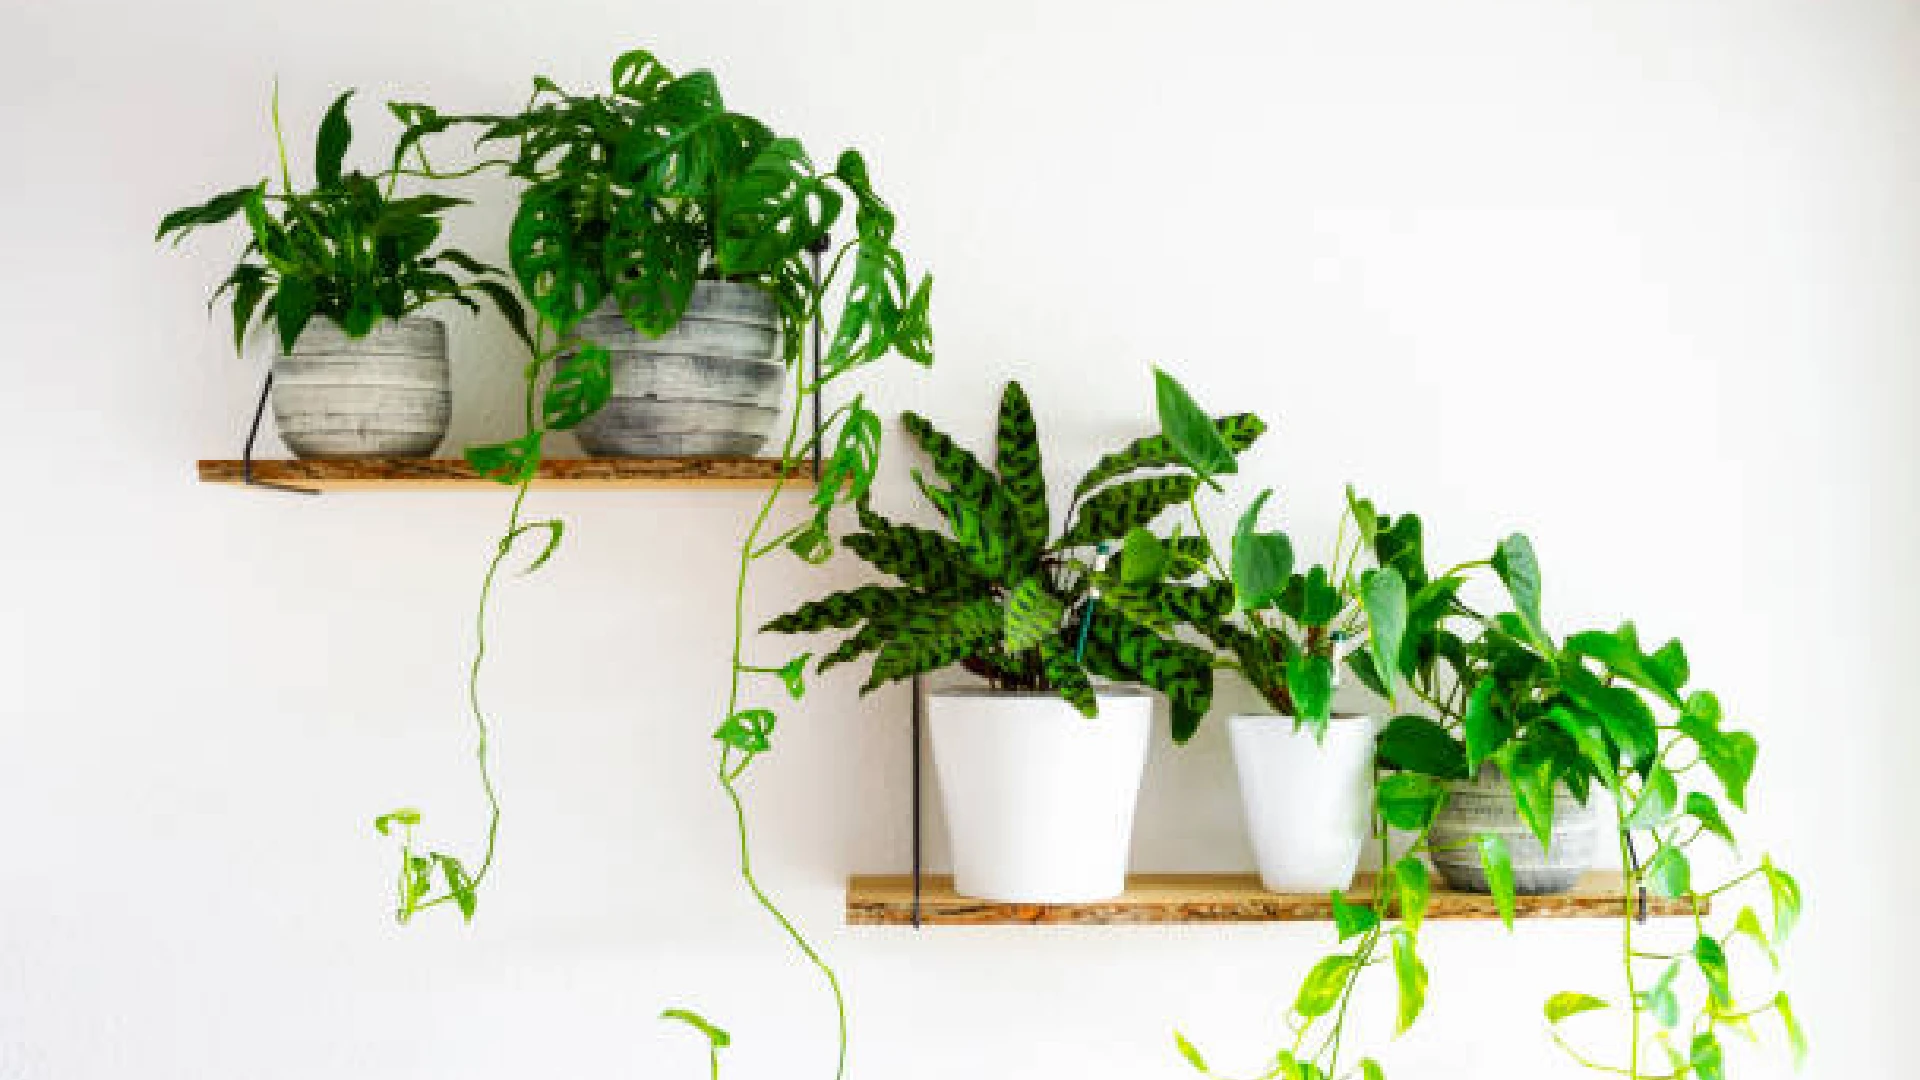 How To Display Houseplants: Innovative Ideas For Arranging Houseplants